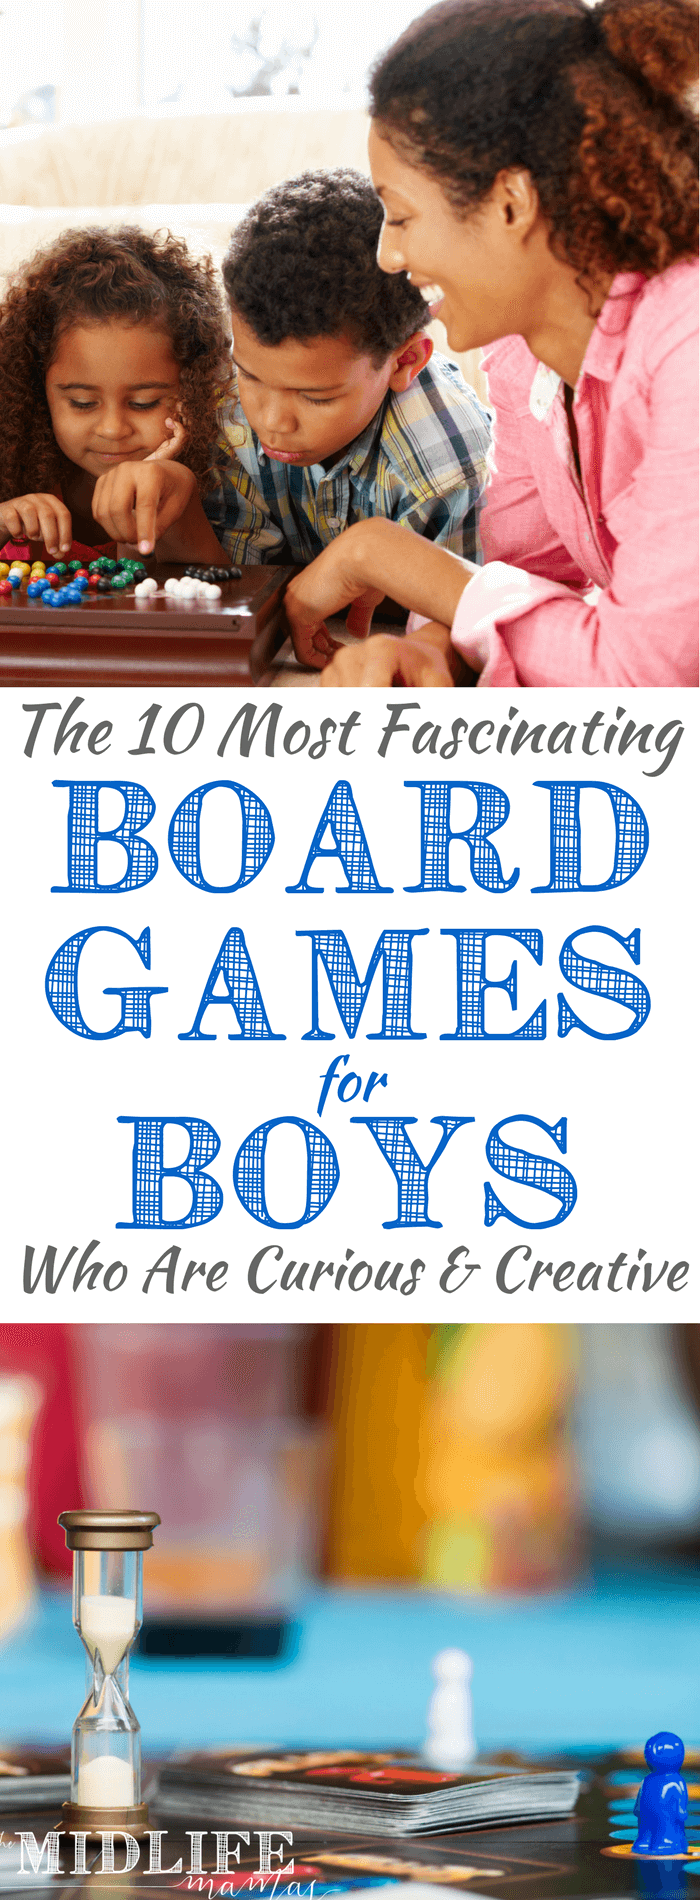 Are you looking for good ideas for indoor board games for boys? Our love of board games is one of my favorite things about our family life. These board games for creative kids are simple and low tech, but they always deliver on the fun! My guys love a creative challenge. If yours are too - this list is pure gold!! Save it and share it...you'll be glad you did! #gamesforboys #creativekids #boardgames #indoorgames www.themidlifemamas.com